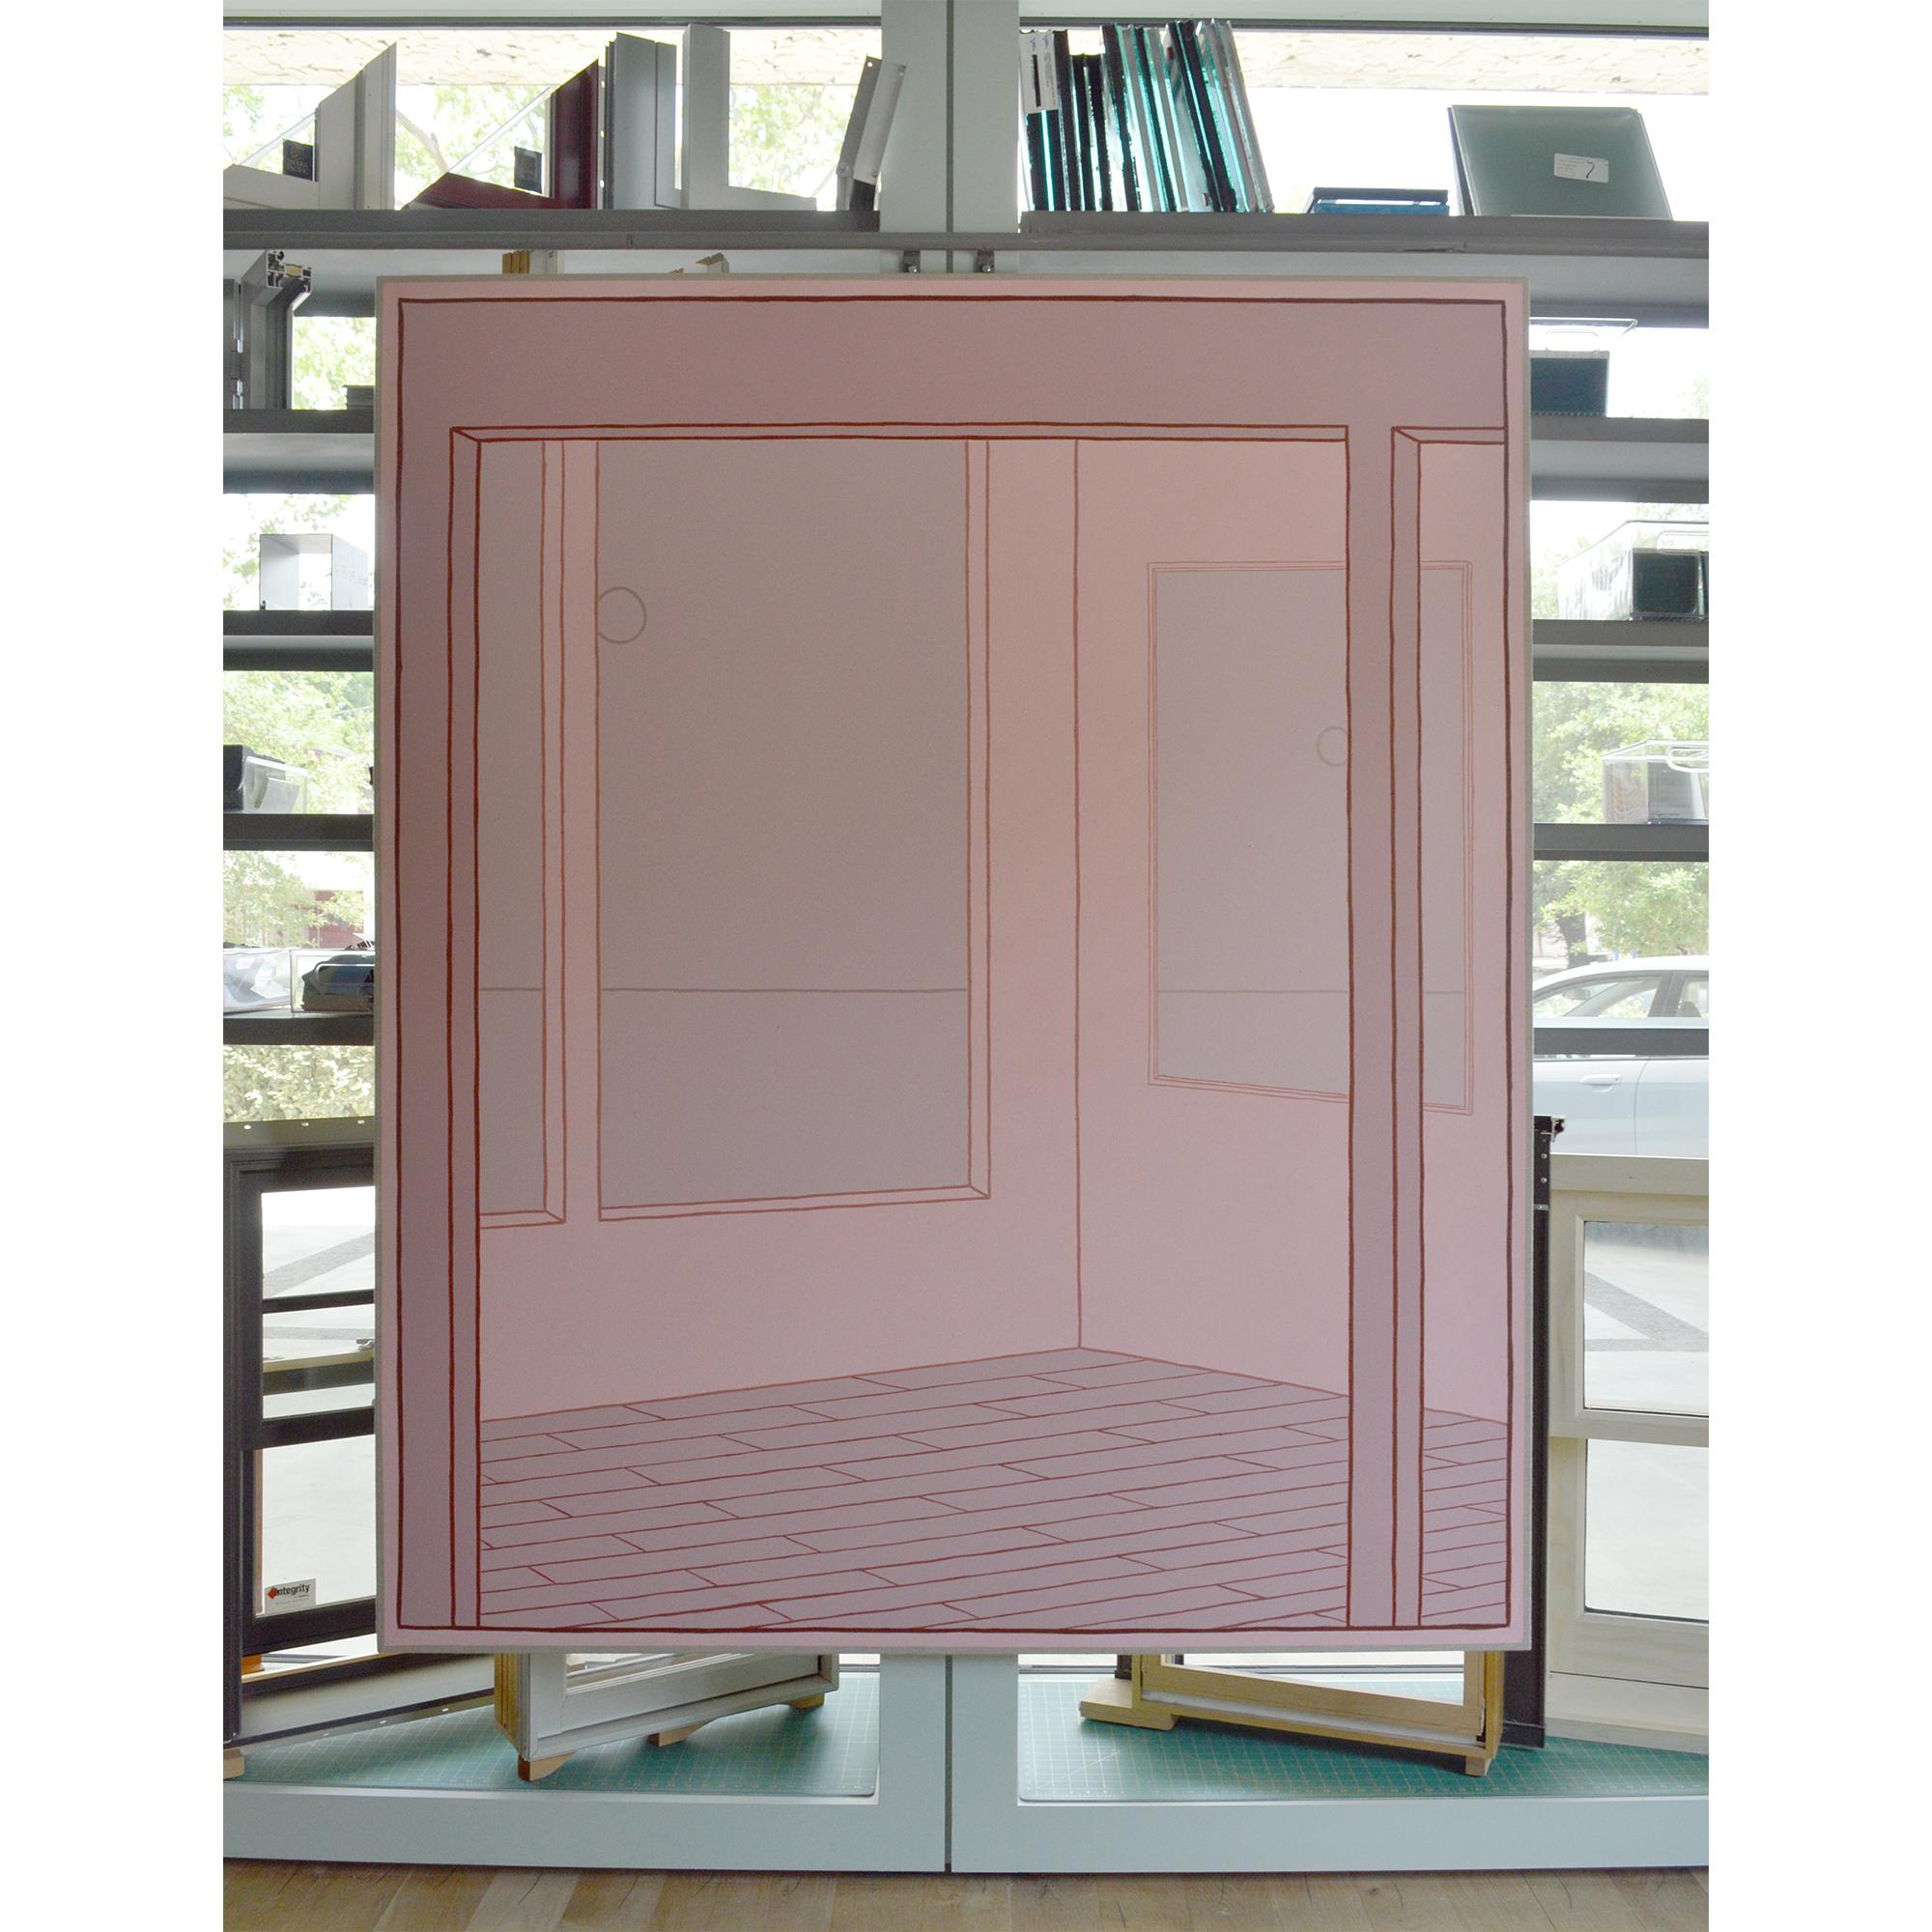 Heath West
Haus Scharoun, 2018
Oil and acrylic on linen
79h x 66w in


Arrange enough edges together, and they'll form a frame. Arrange enough edges within the space of a frame, and they’ll begin to form a place. The spatial elements of a painting